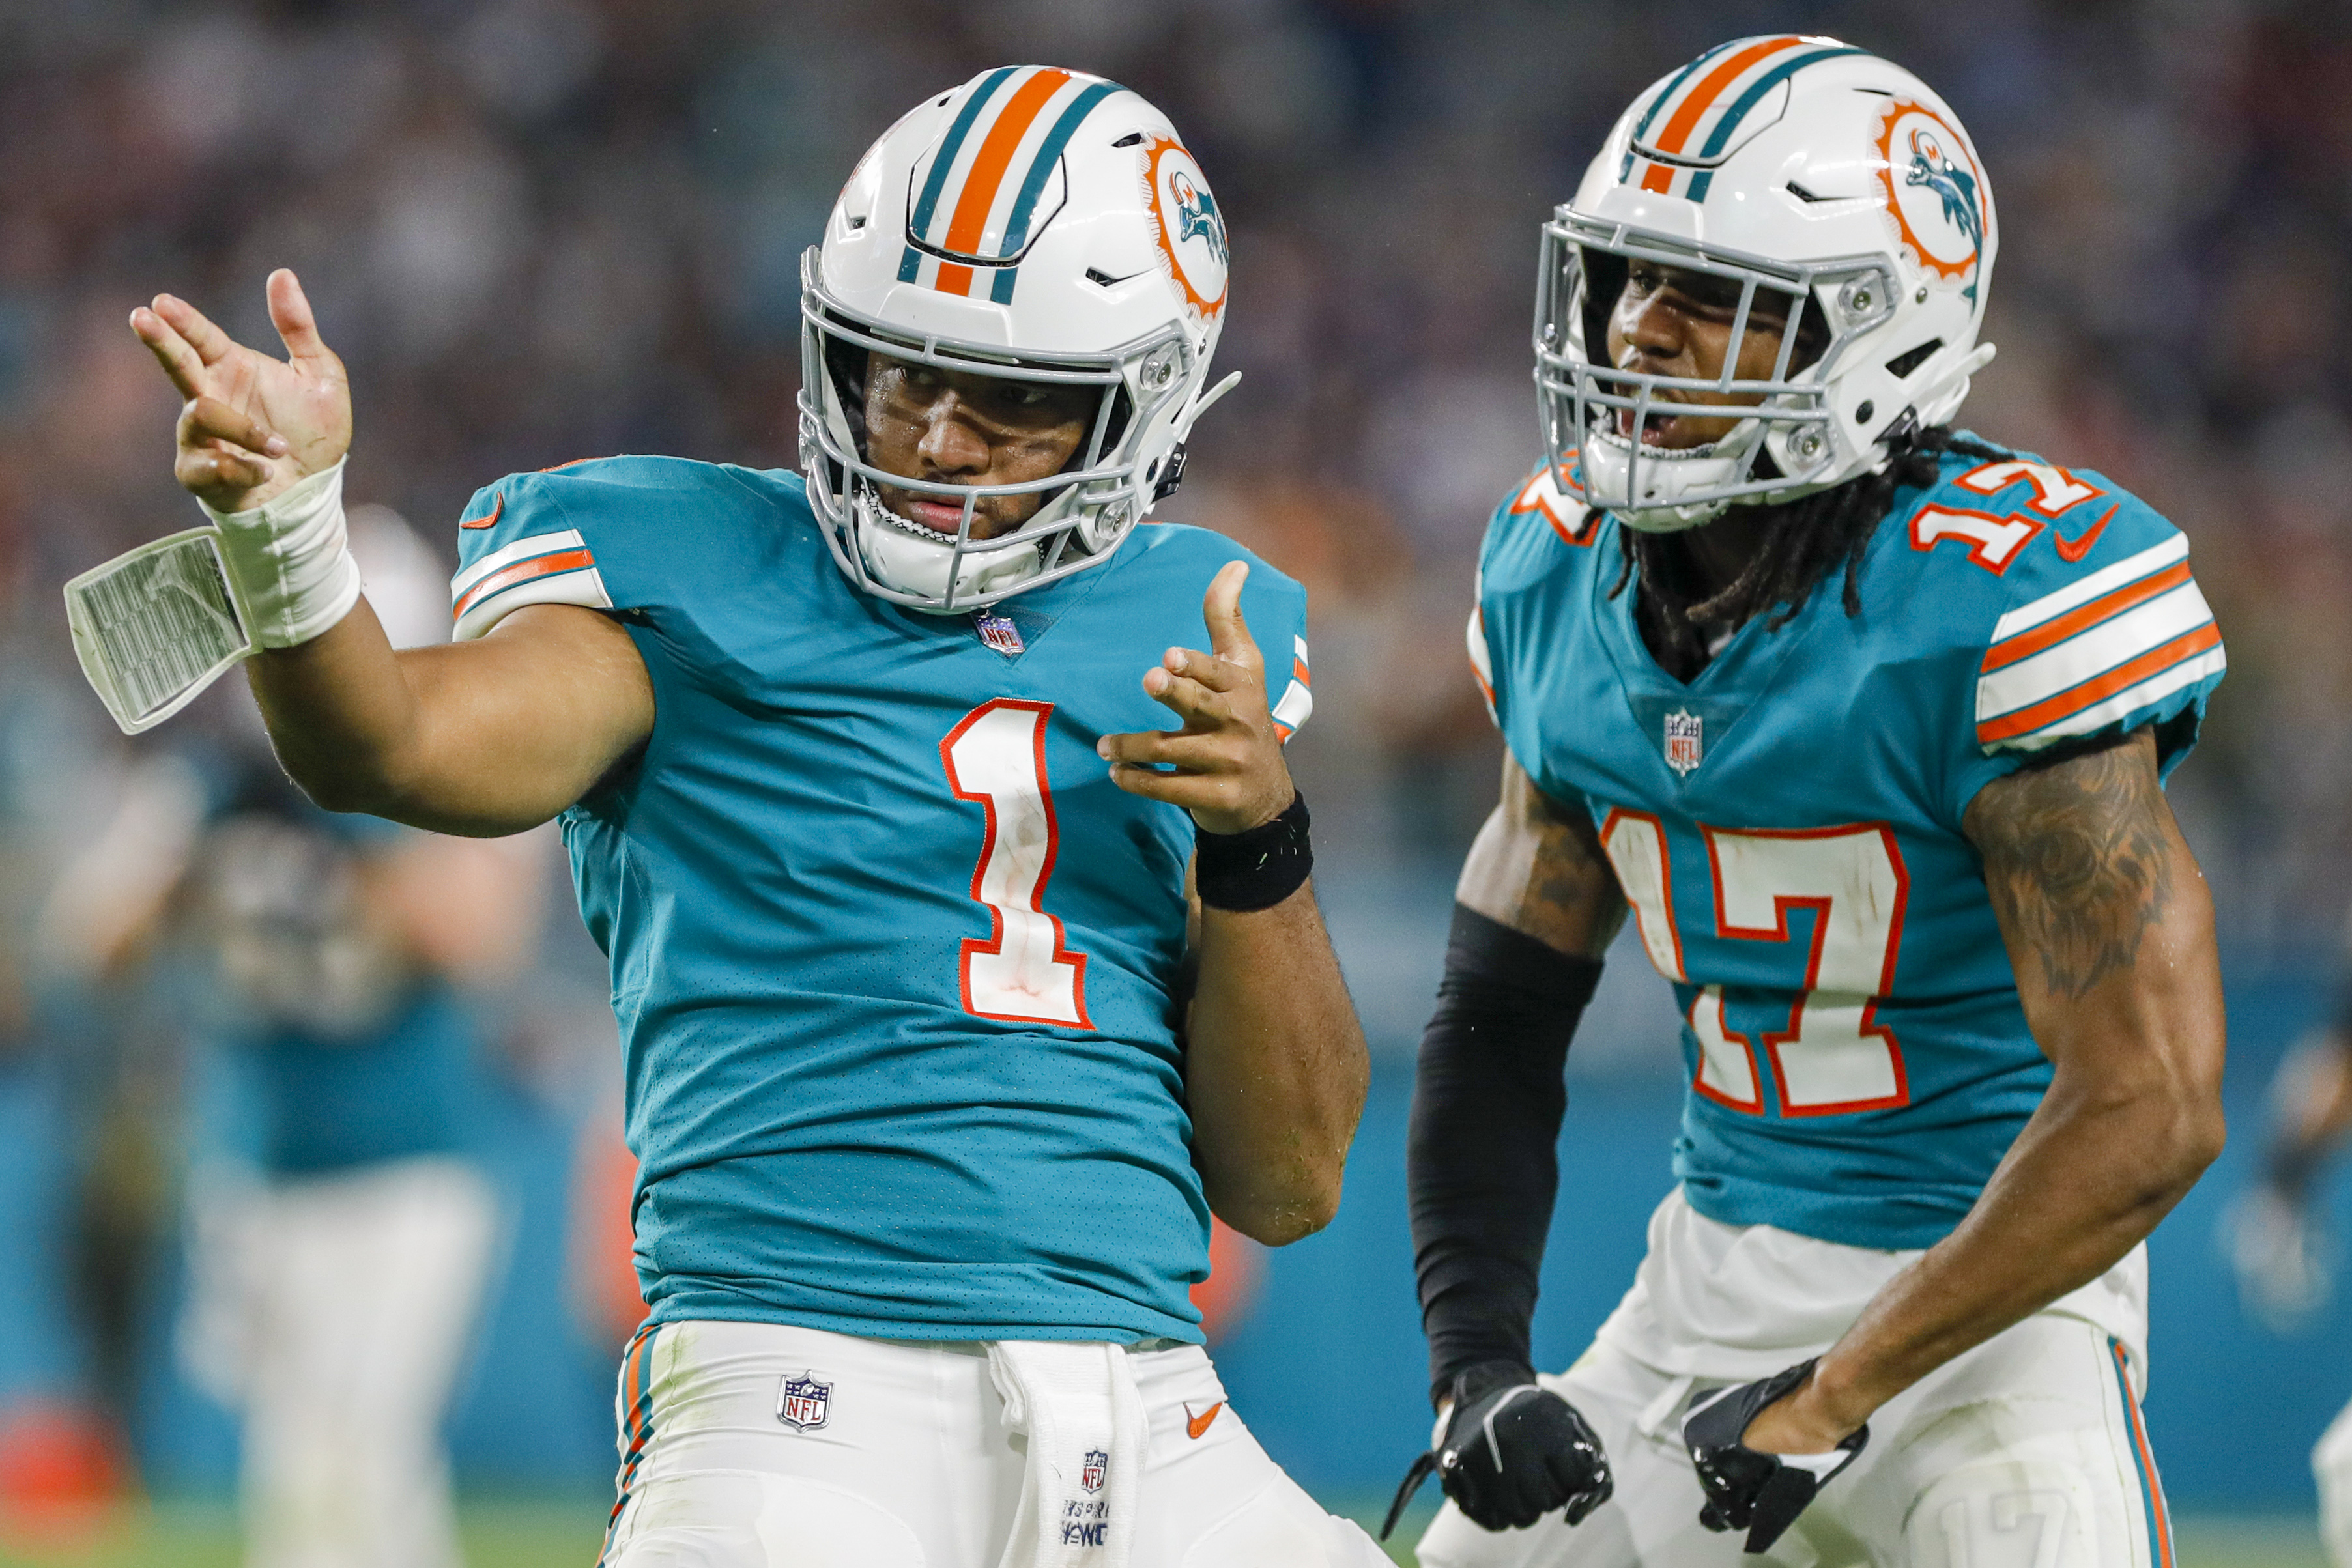 Super Bowl Sleeper Pick: Miami Getting Overlooked in 2023